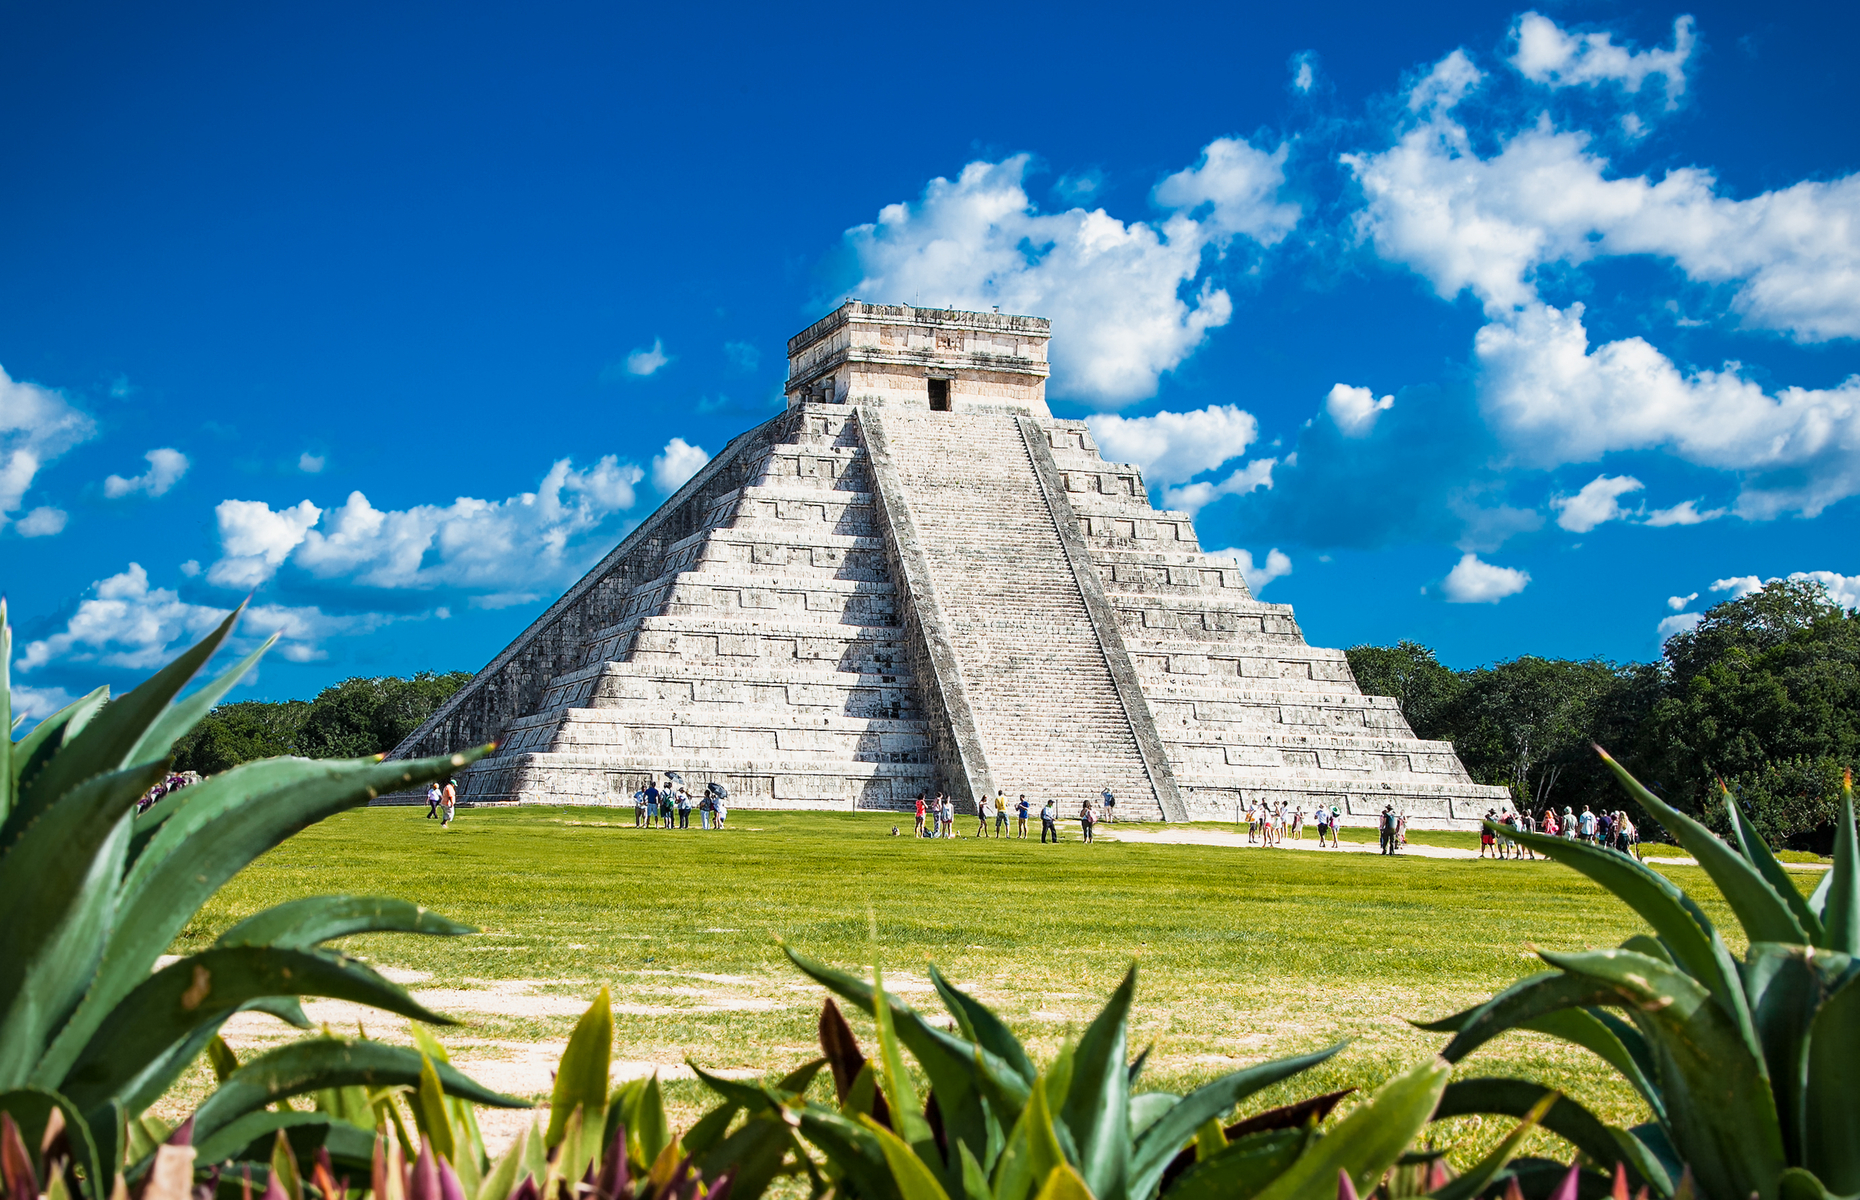 <p>The ancient Maya city of Chichen Itza is located on the Yucatan Peninsula in Mexico. Every year, thousands of visitors come to admire the spectacle of the spring equinox, when a shadow is cast over the Pyramid of Kukulkan, as the Maya witnessed many years ago.</p>